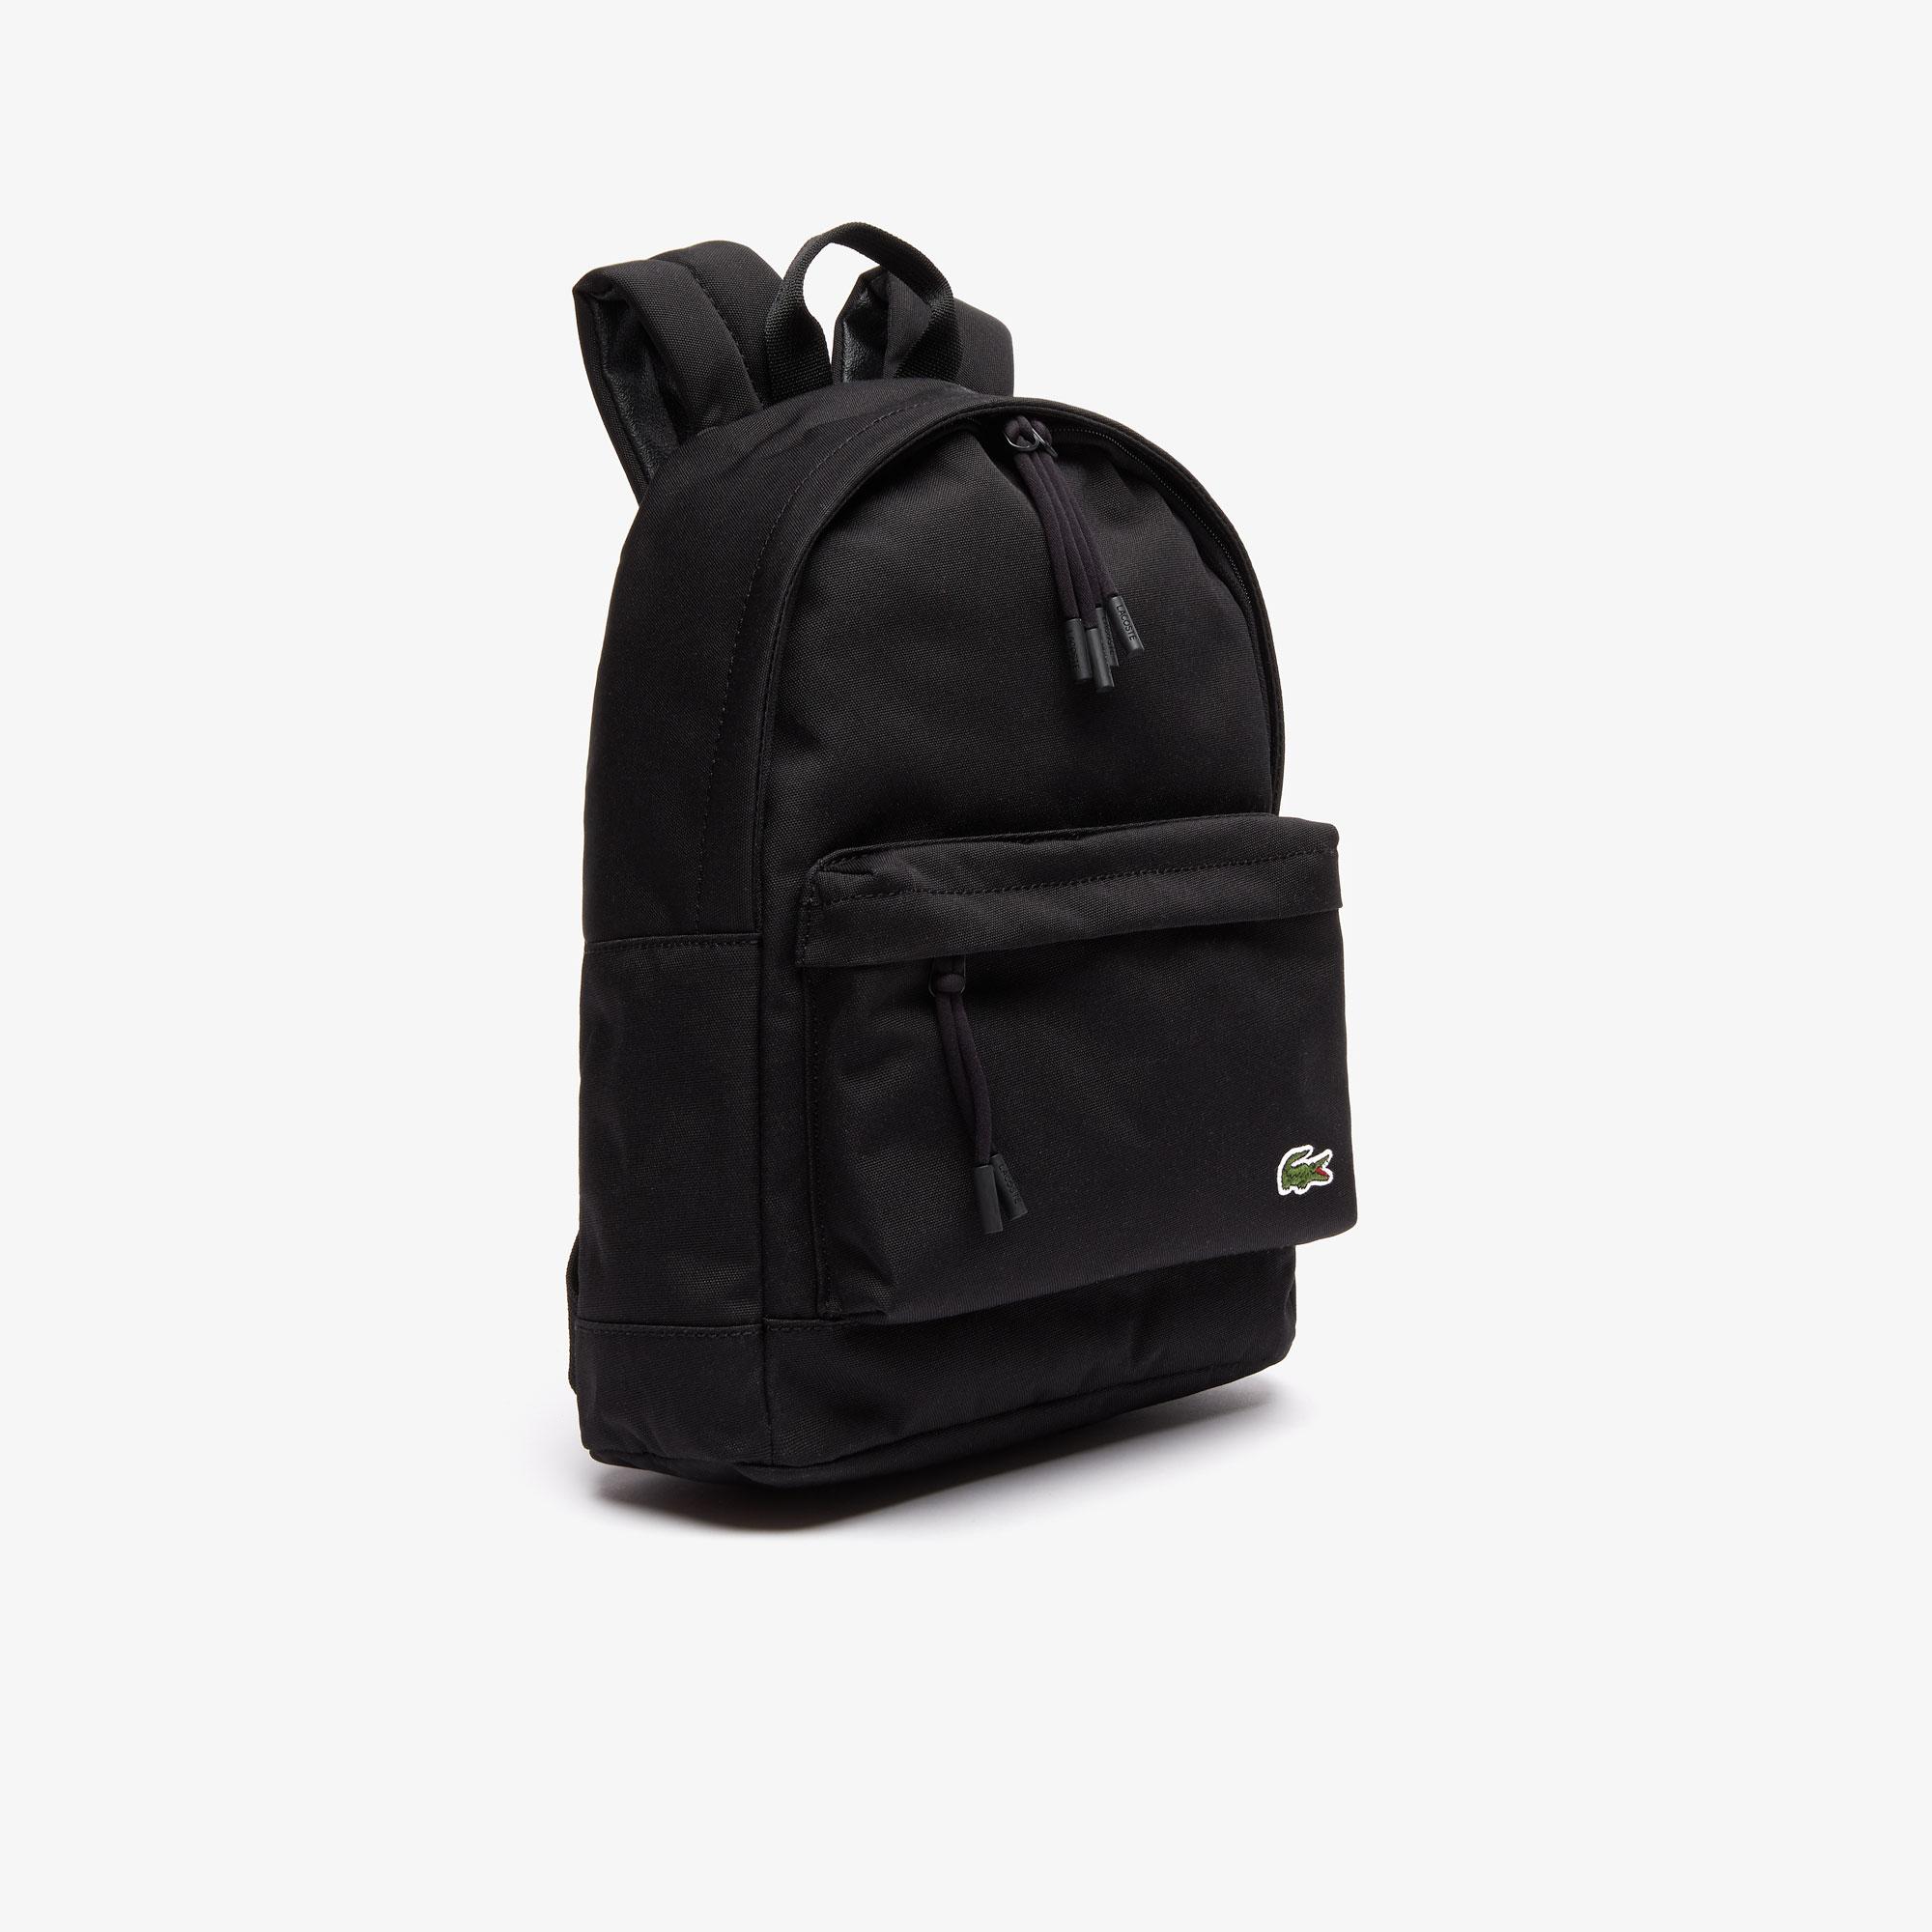 Lacoste  Men's Neocroc Small Canvas Backpack 